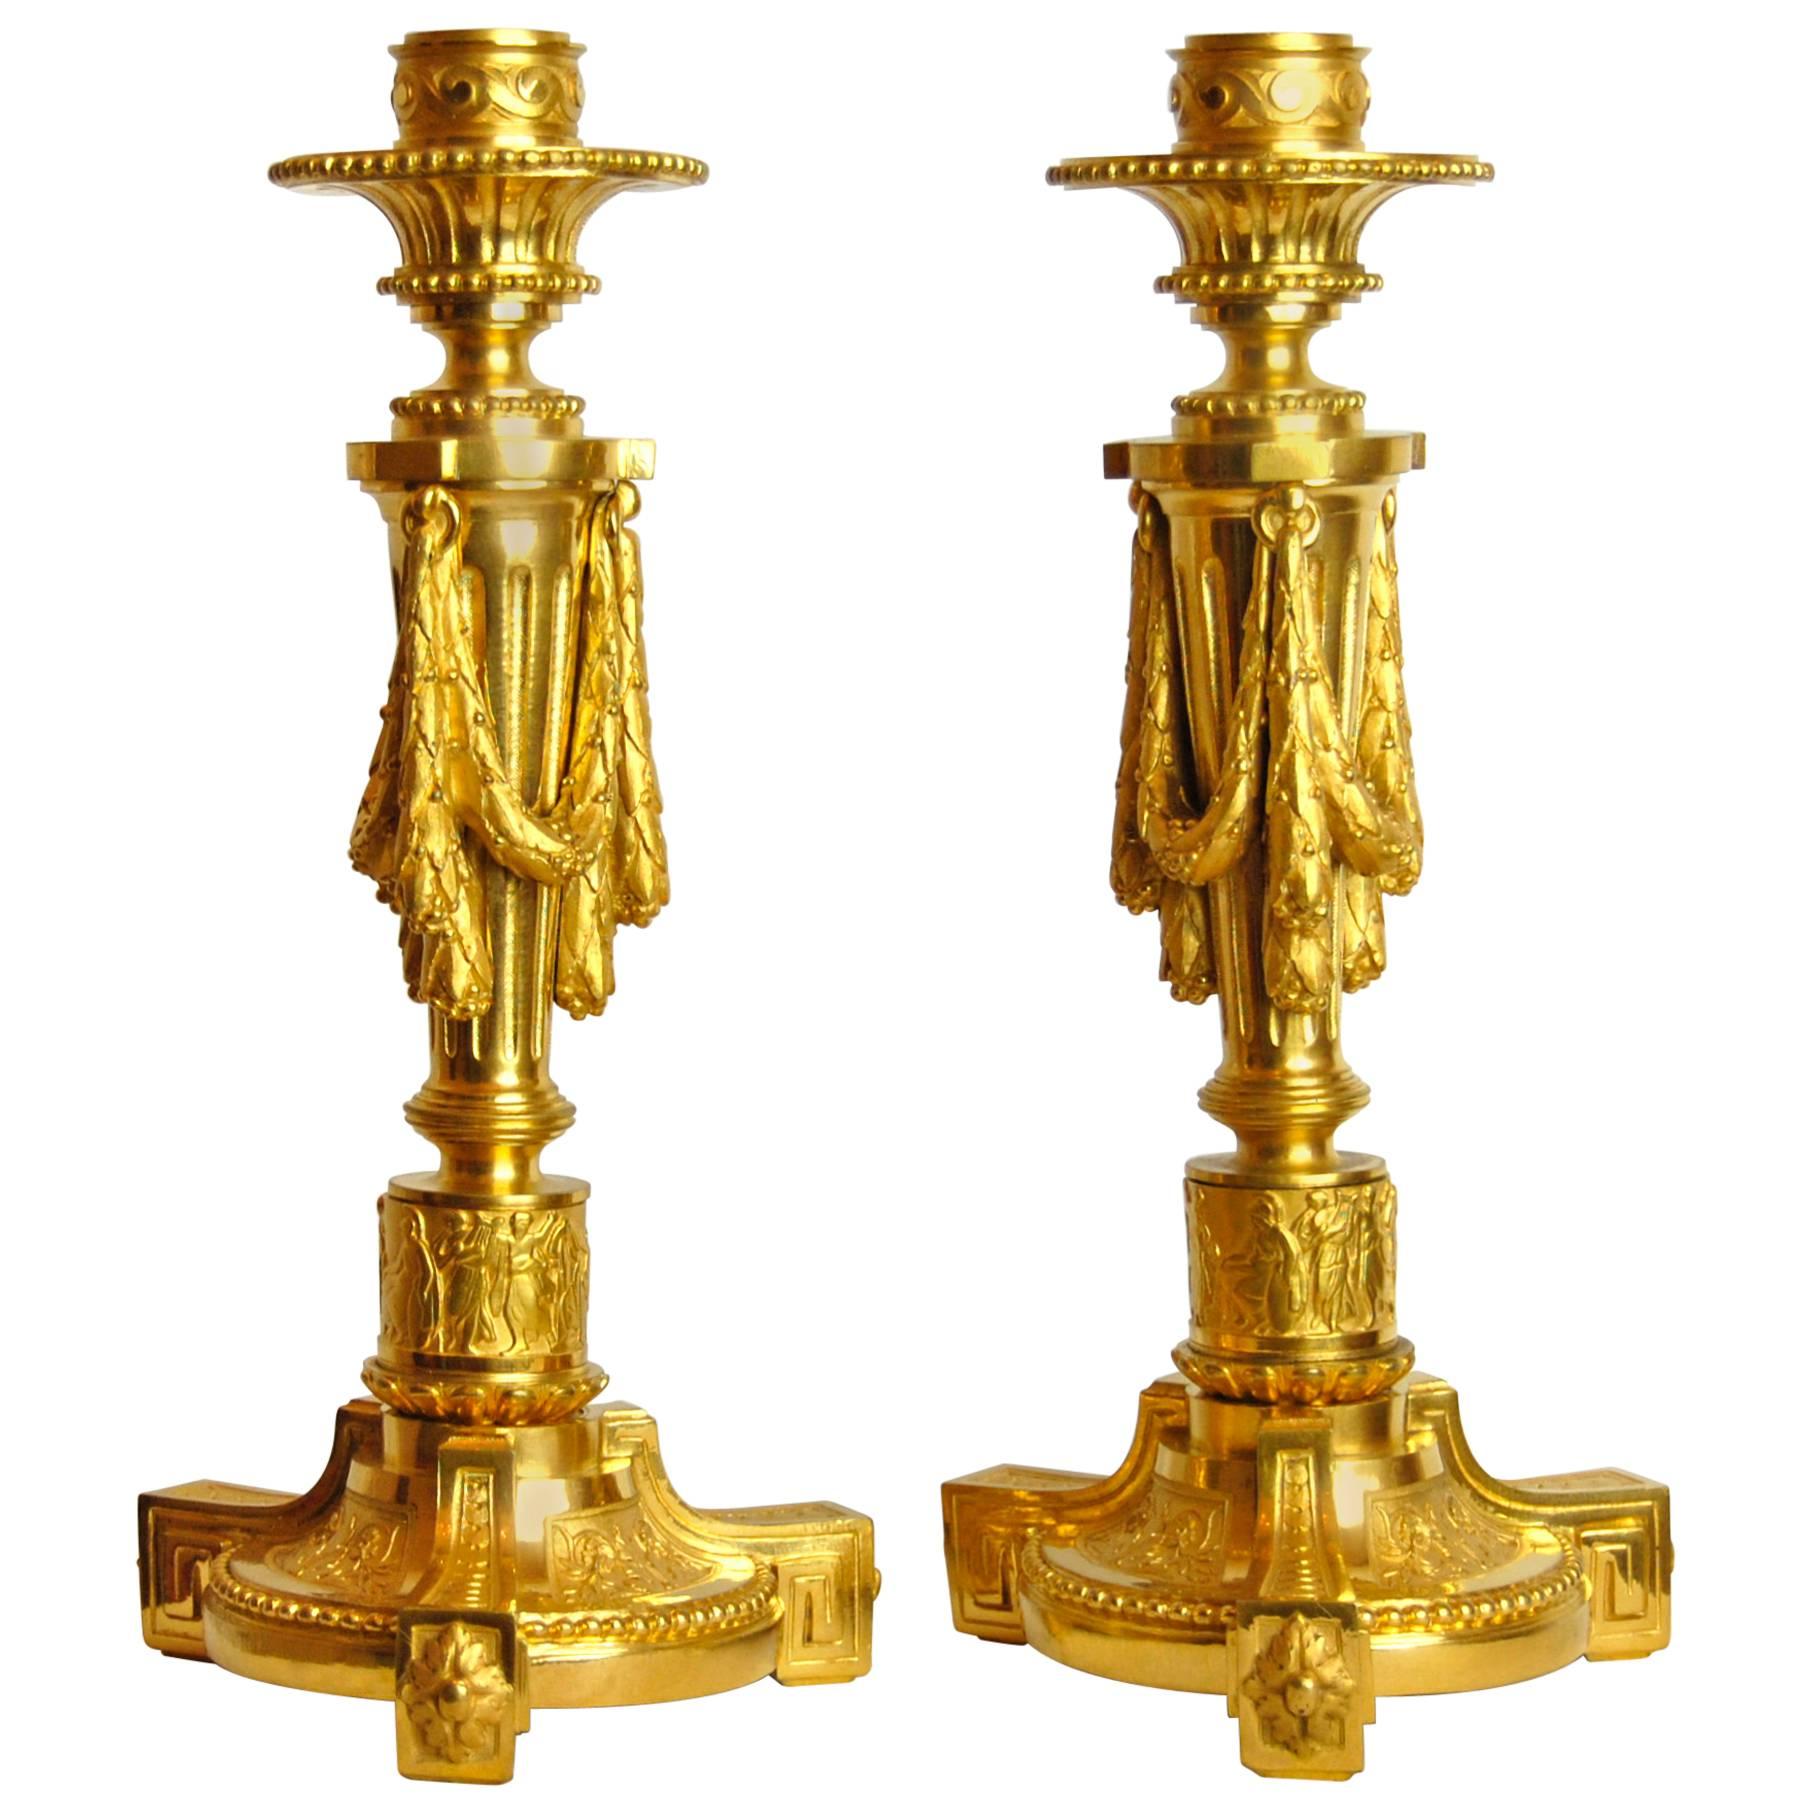 Pair of 19th Century French Empire Gilt Ormolu Candlesticks Finest Chiselled